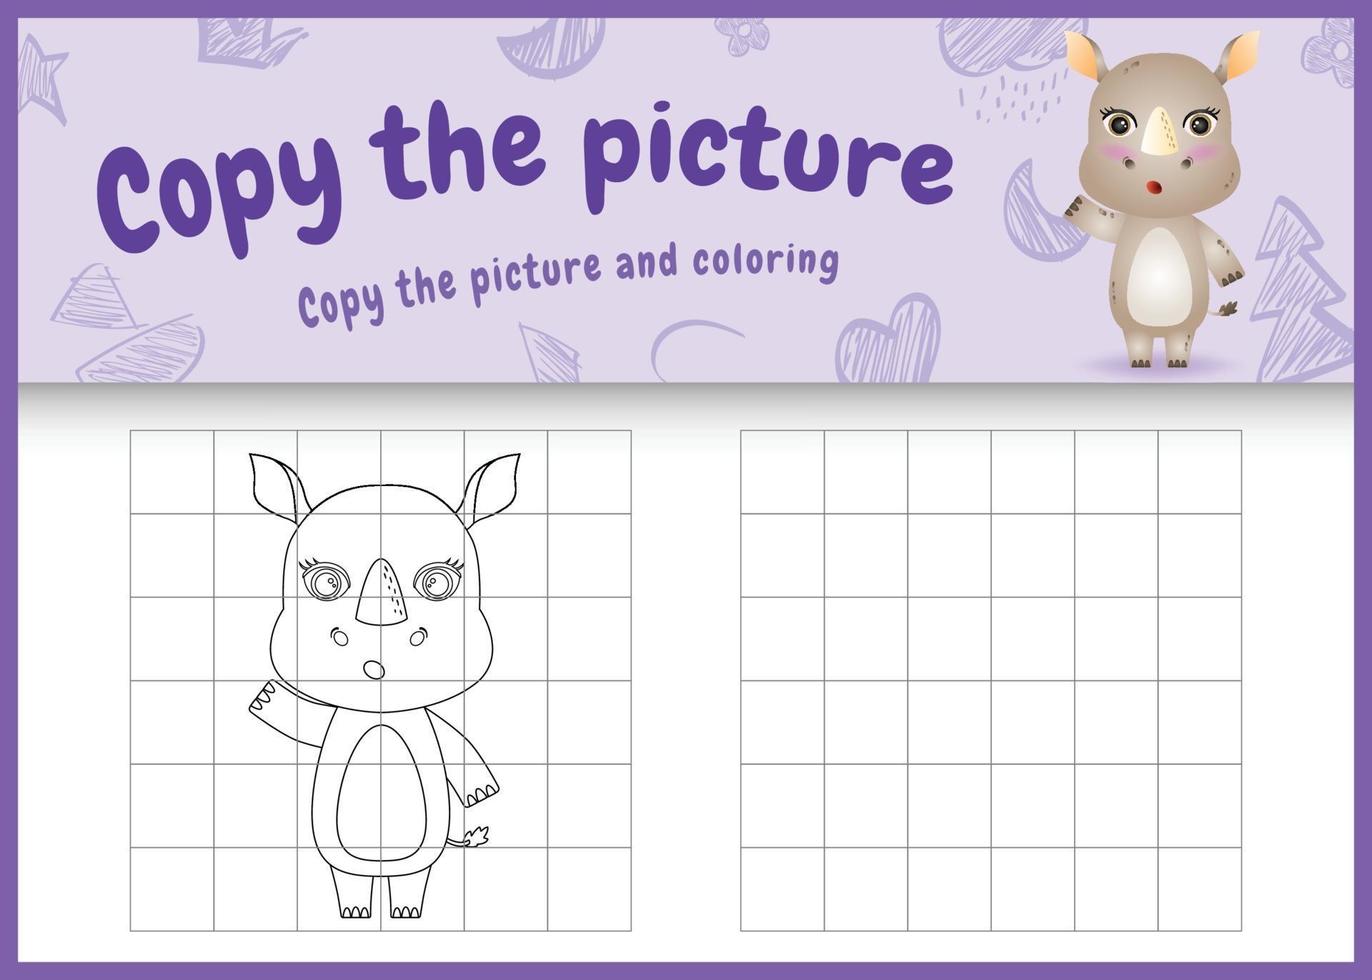 copy the picture kids game and coloring page with a cute rhino character illustration vector